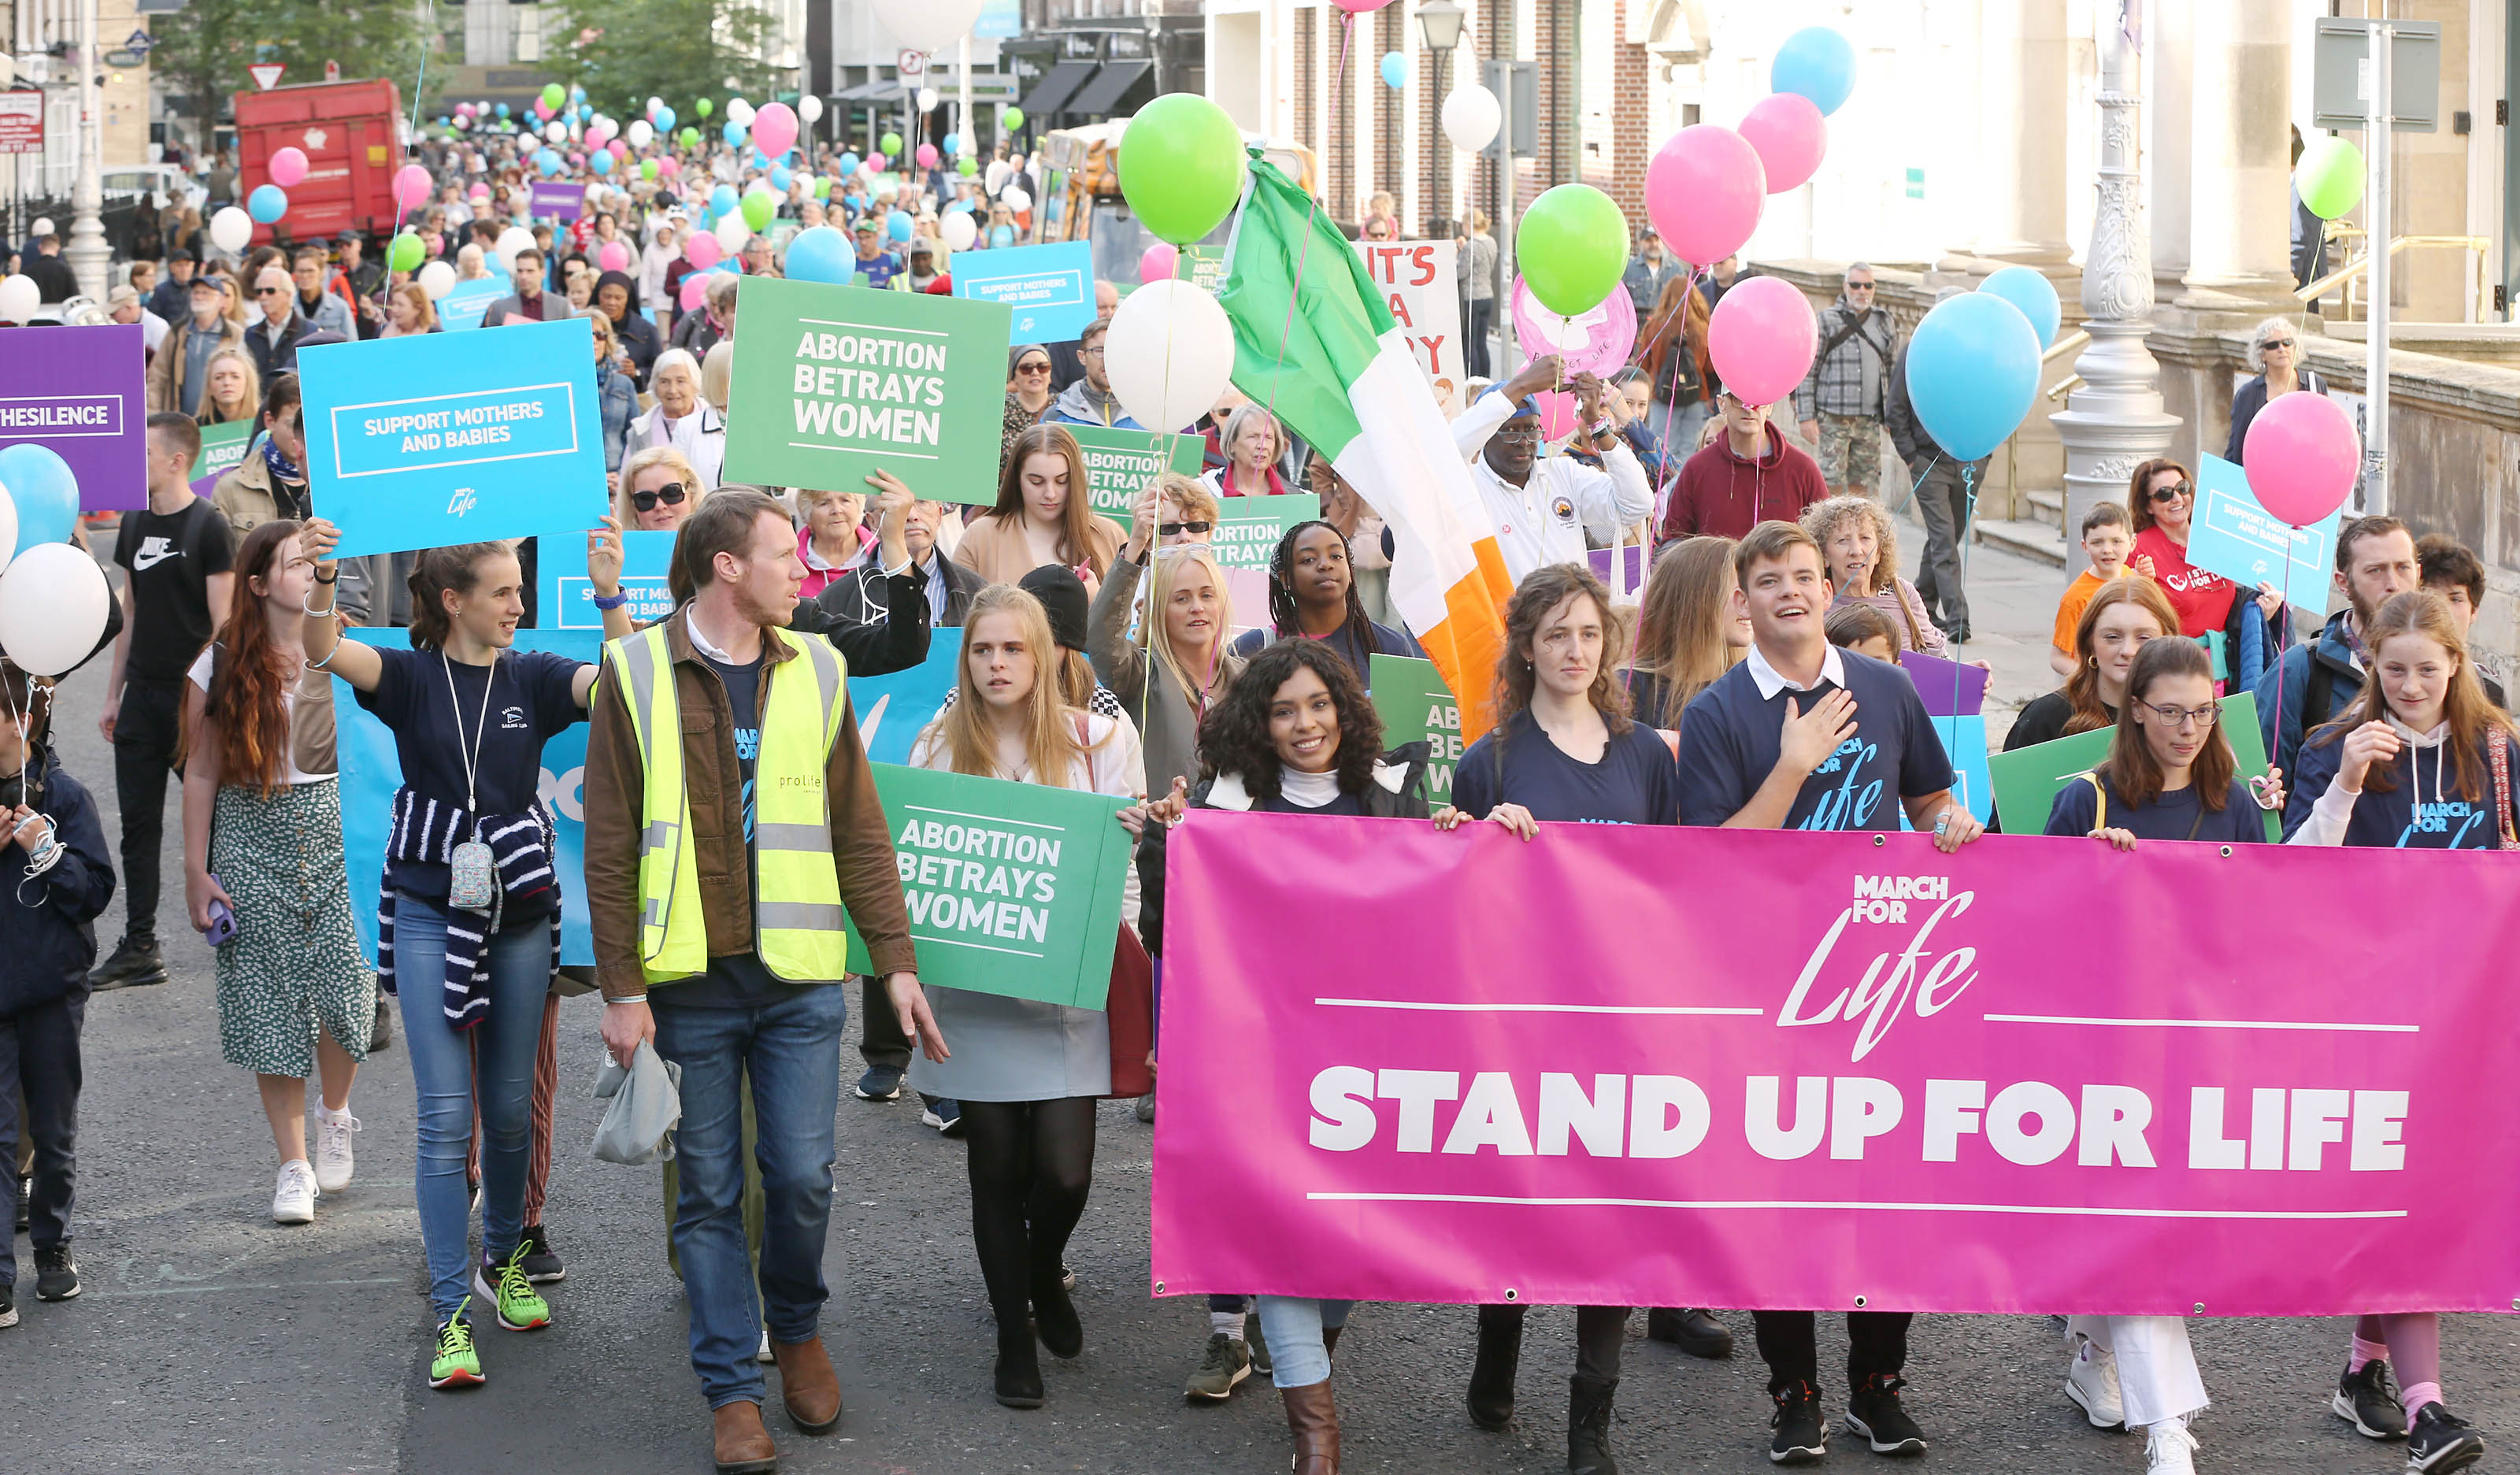 21.04.2023 – Breaking reports the three-year review will include “sweeping changes” underlines the importance of the March for Life